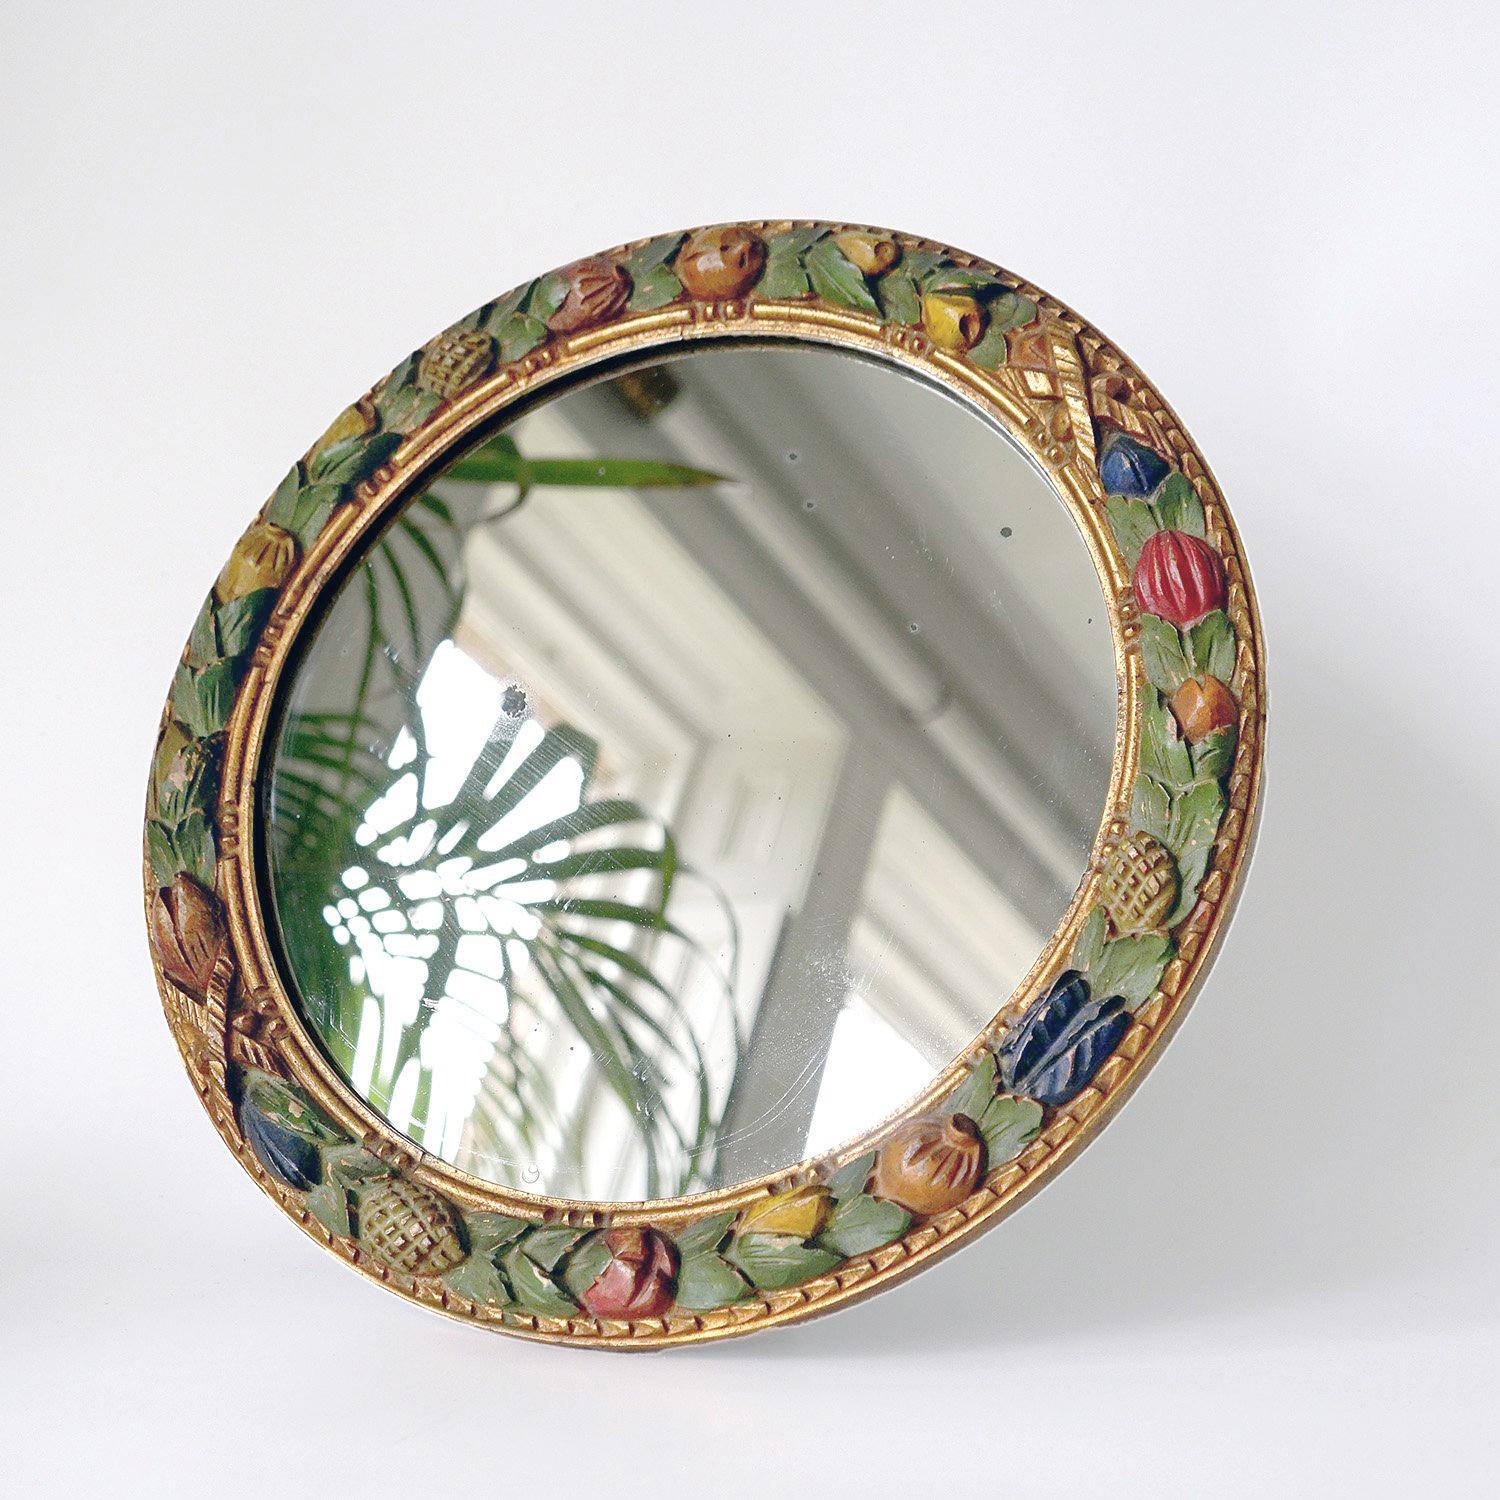 Antique Circular Wall/Table Mirror, Early 20th Century

Carved wooden frame with stylised fruits, nuts and seeds interspersed with foliage with gilt borders.

Original circular mirror plate.

Can be either a table mirror or hung on the wall.

It is